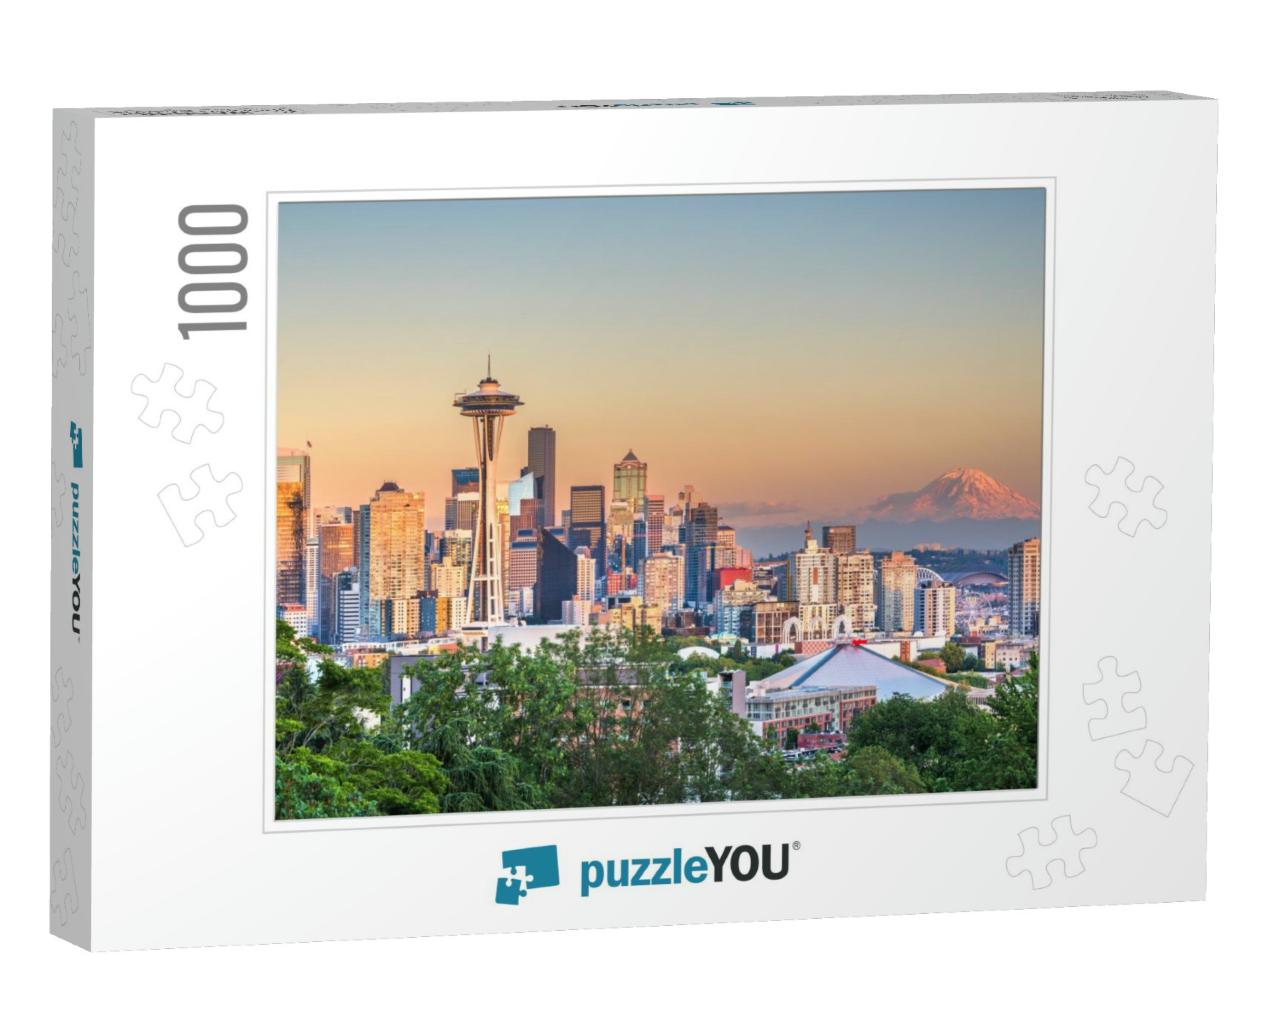 Seattle, Washington, USA Downtown City Skyline At Dusk... Jigsaw Puzzle with 1000 pieces